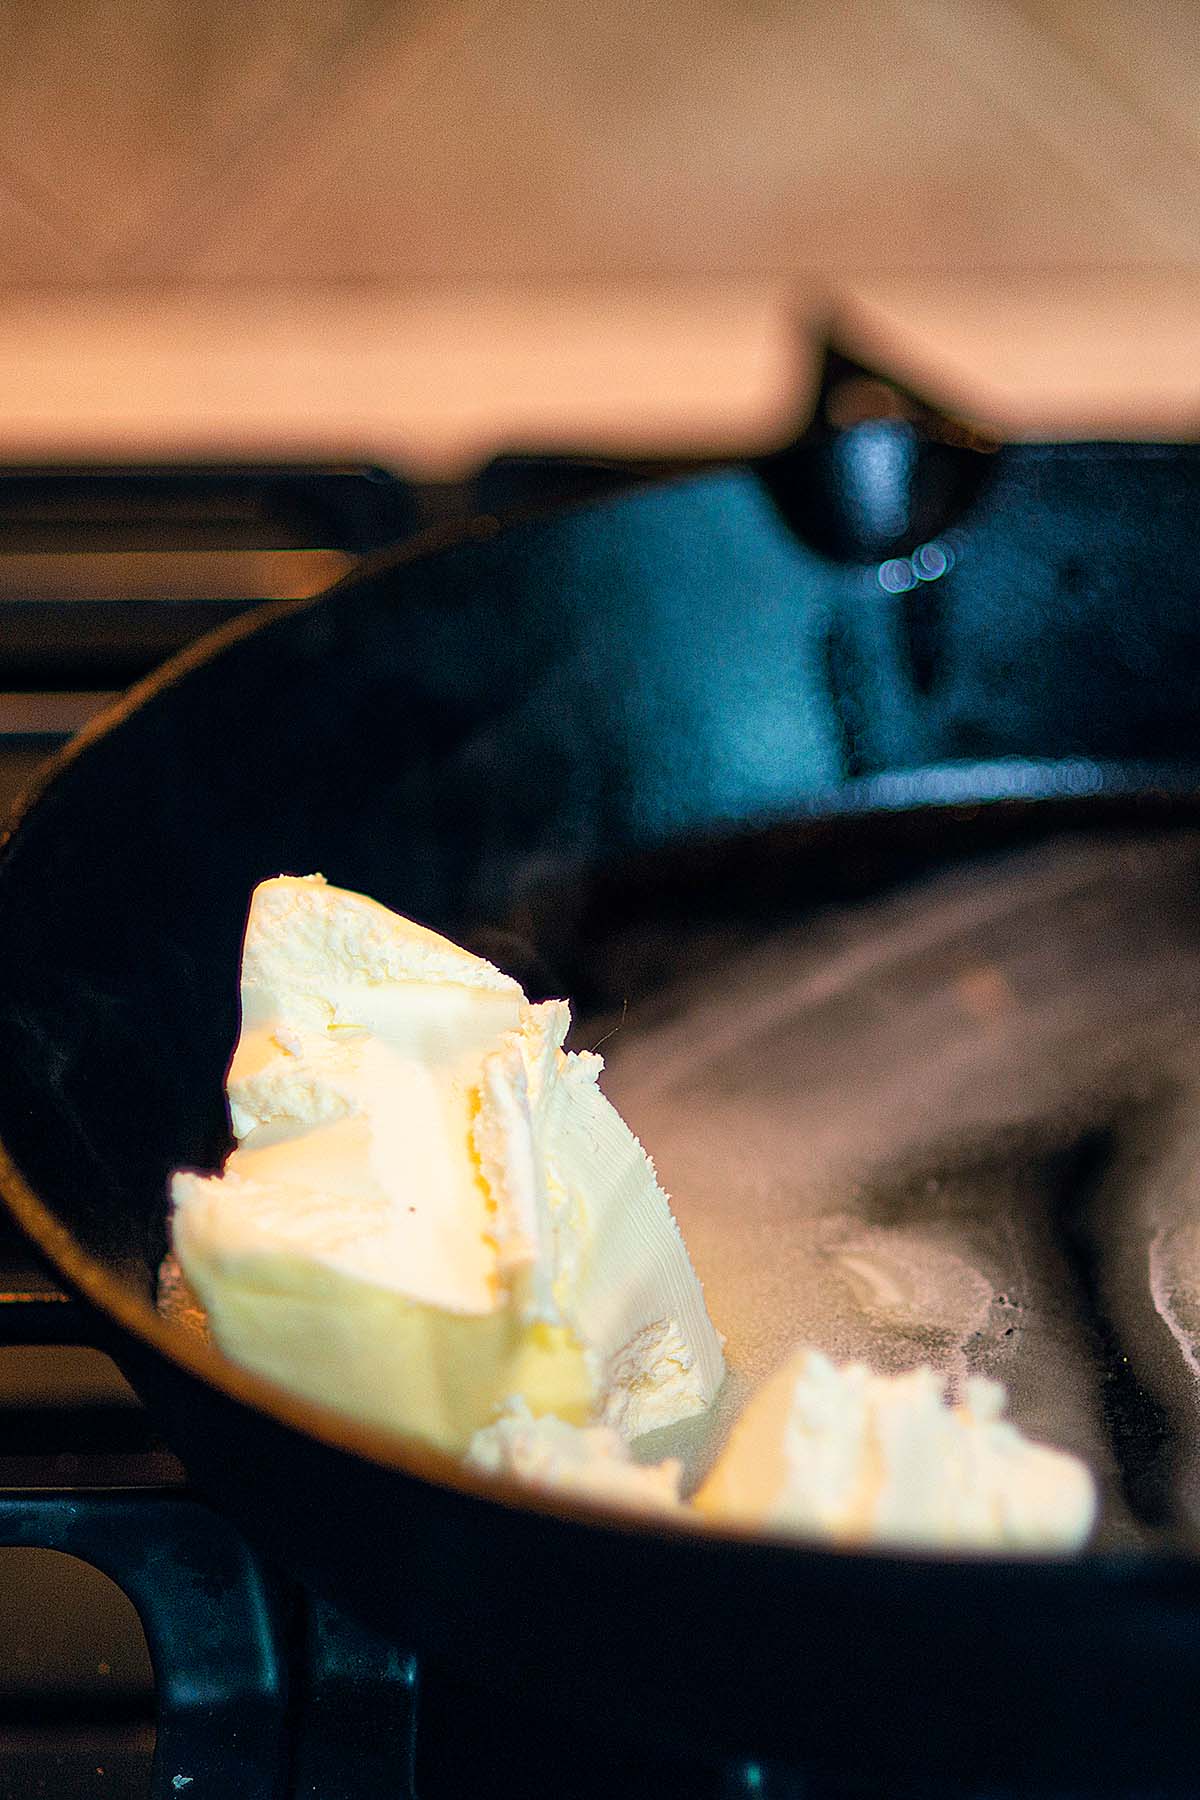 A butter block being melted in a cast iron skillet.